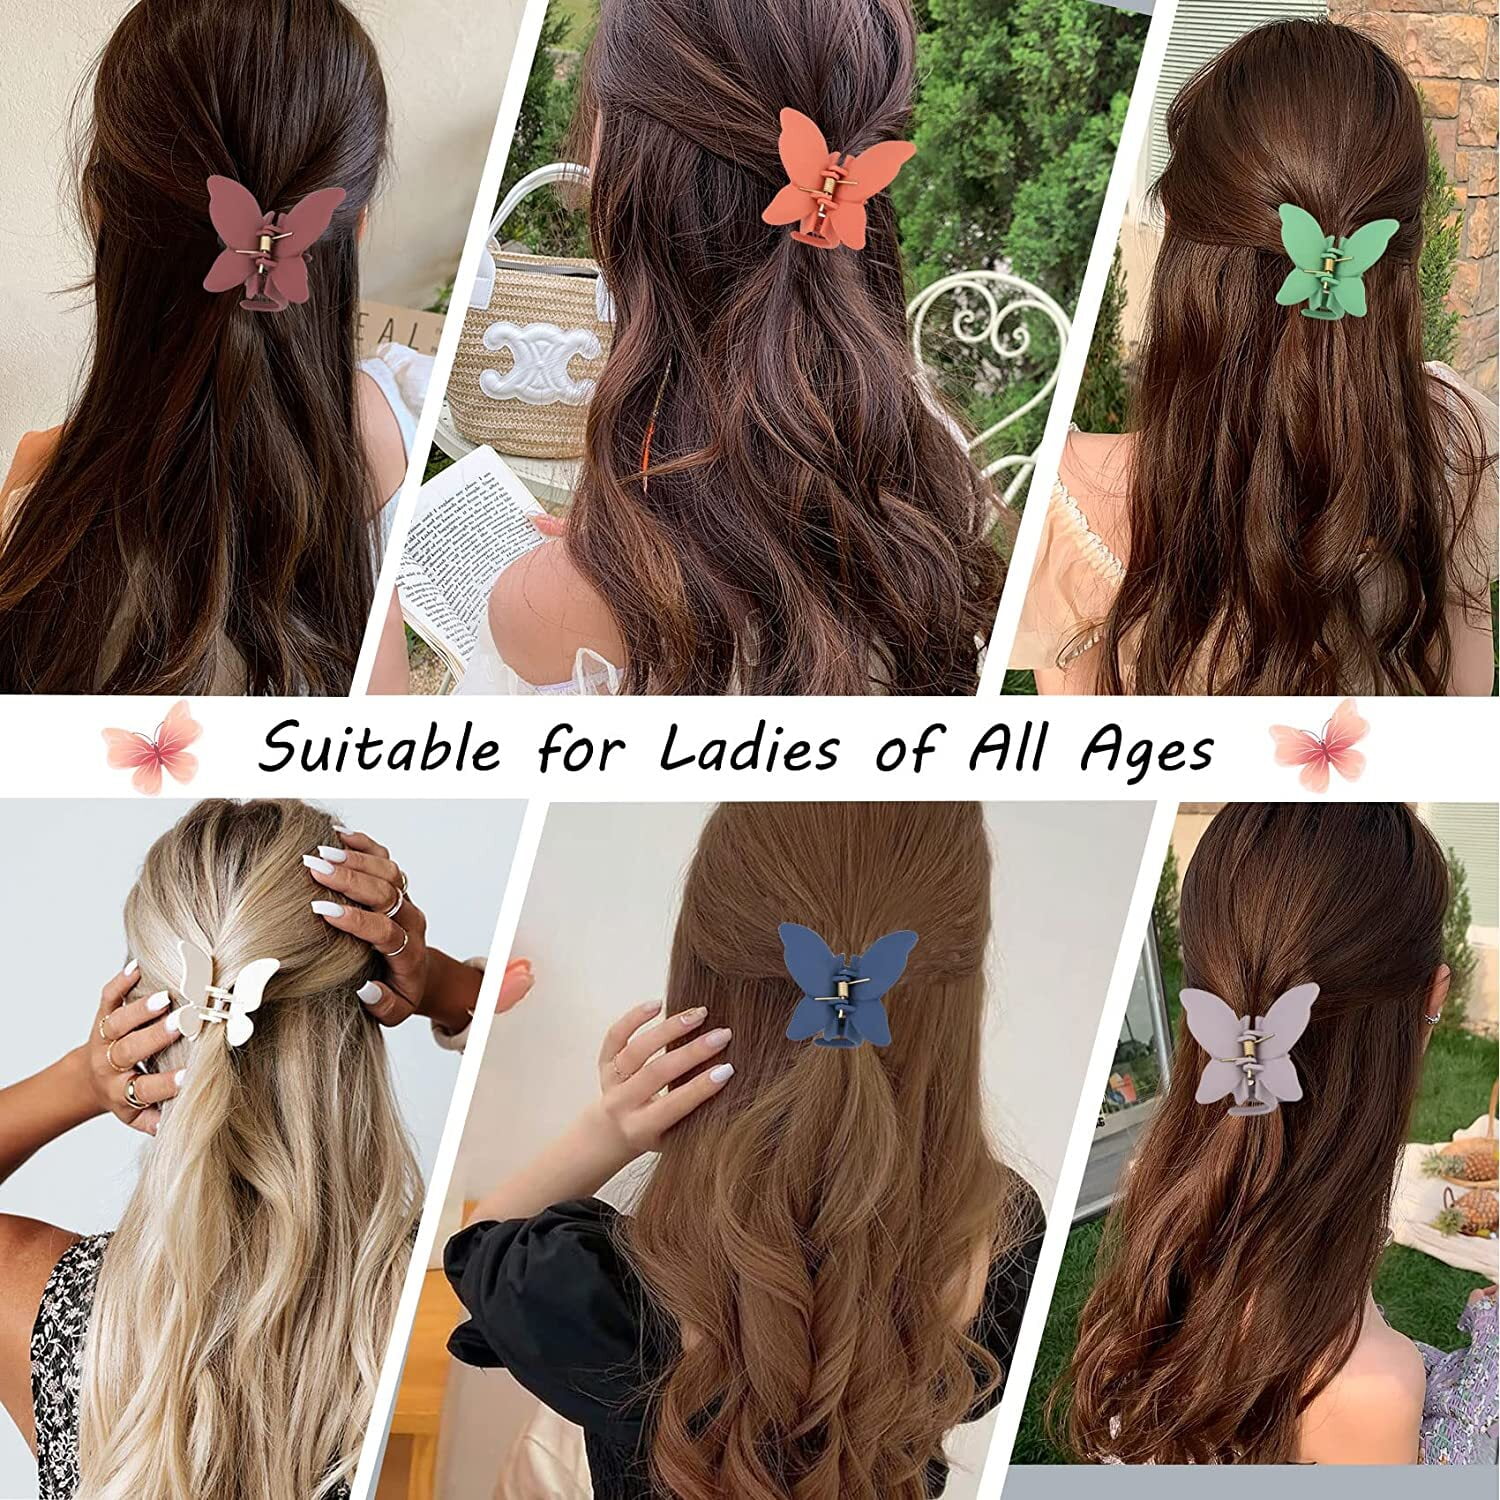 Cute and Easy Hairstyles With Claw Clips for All Hair Types - Uptown Girl